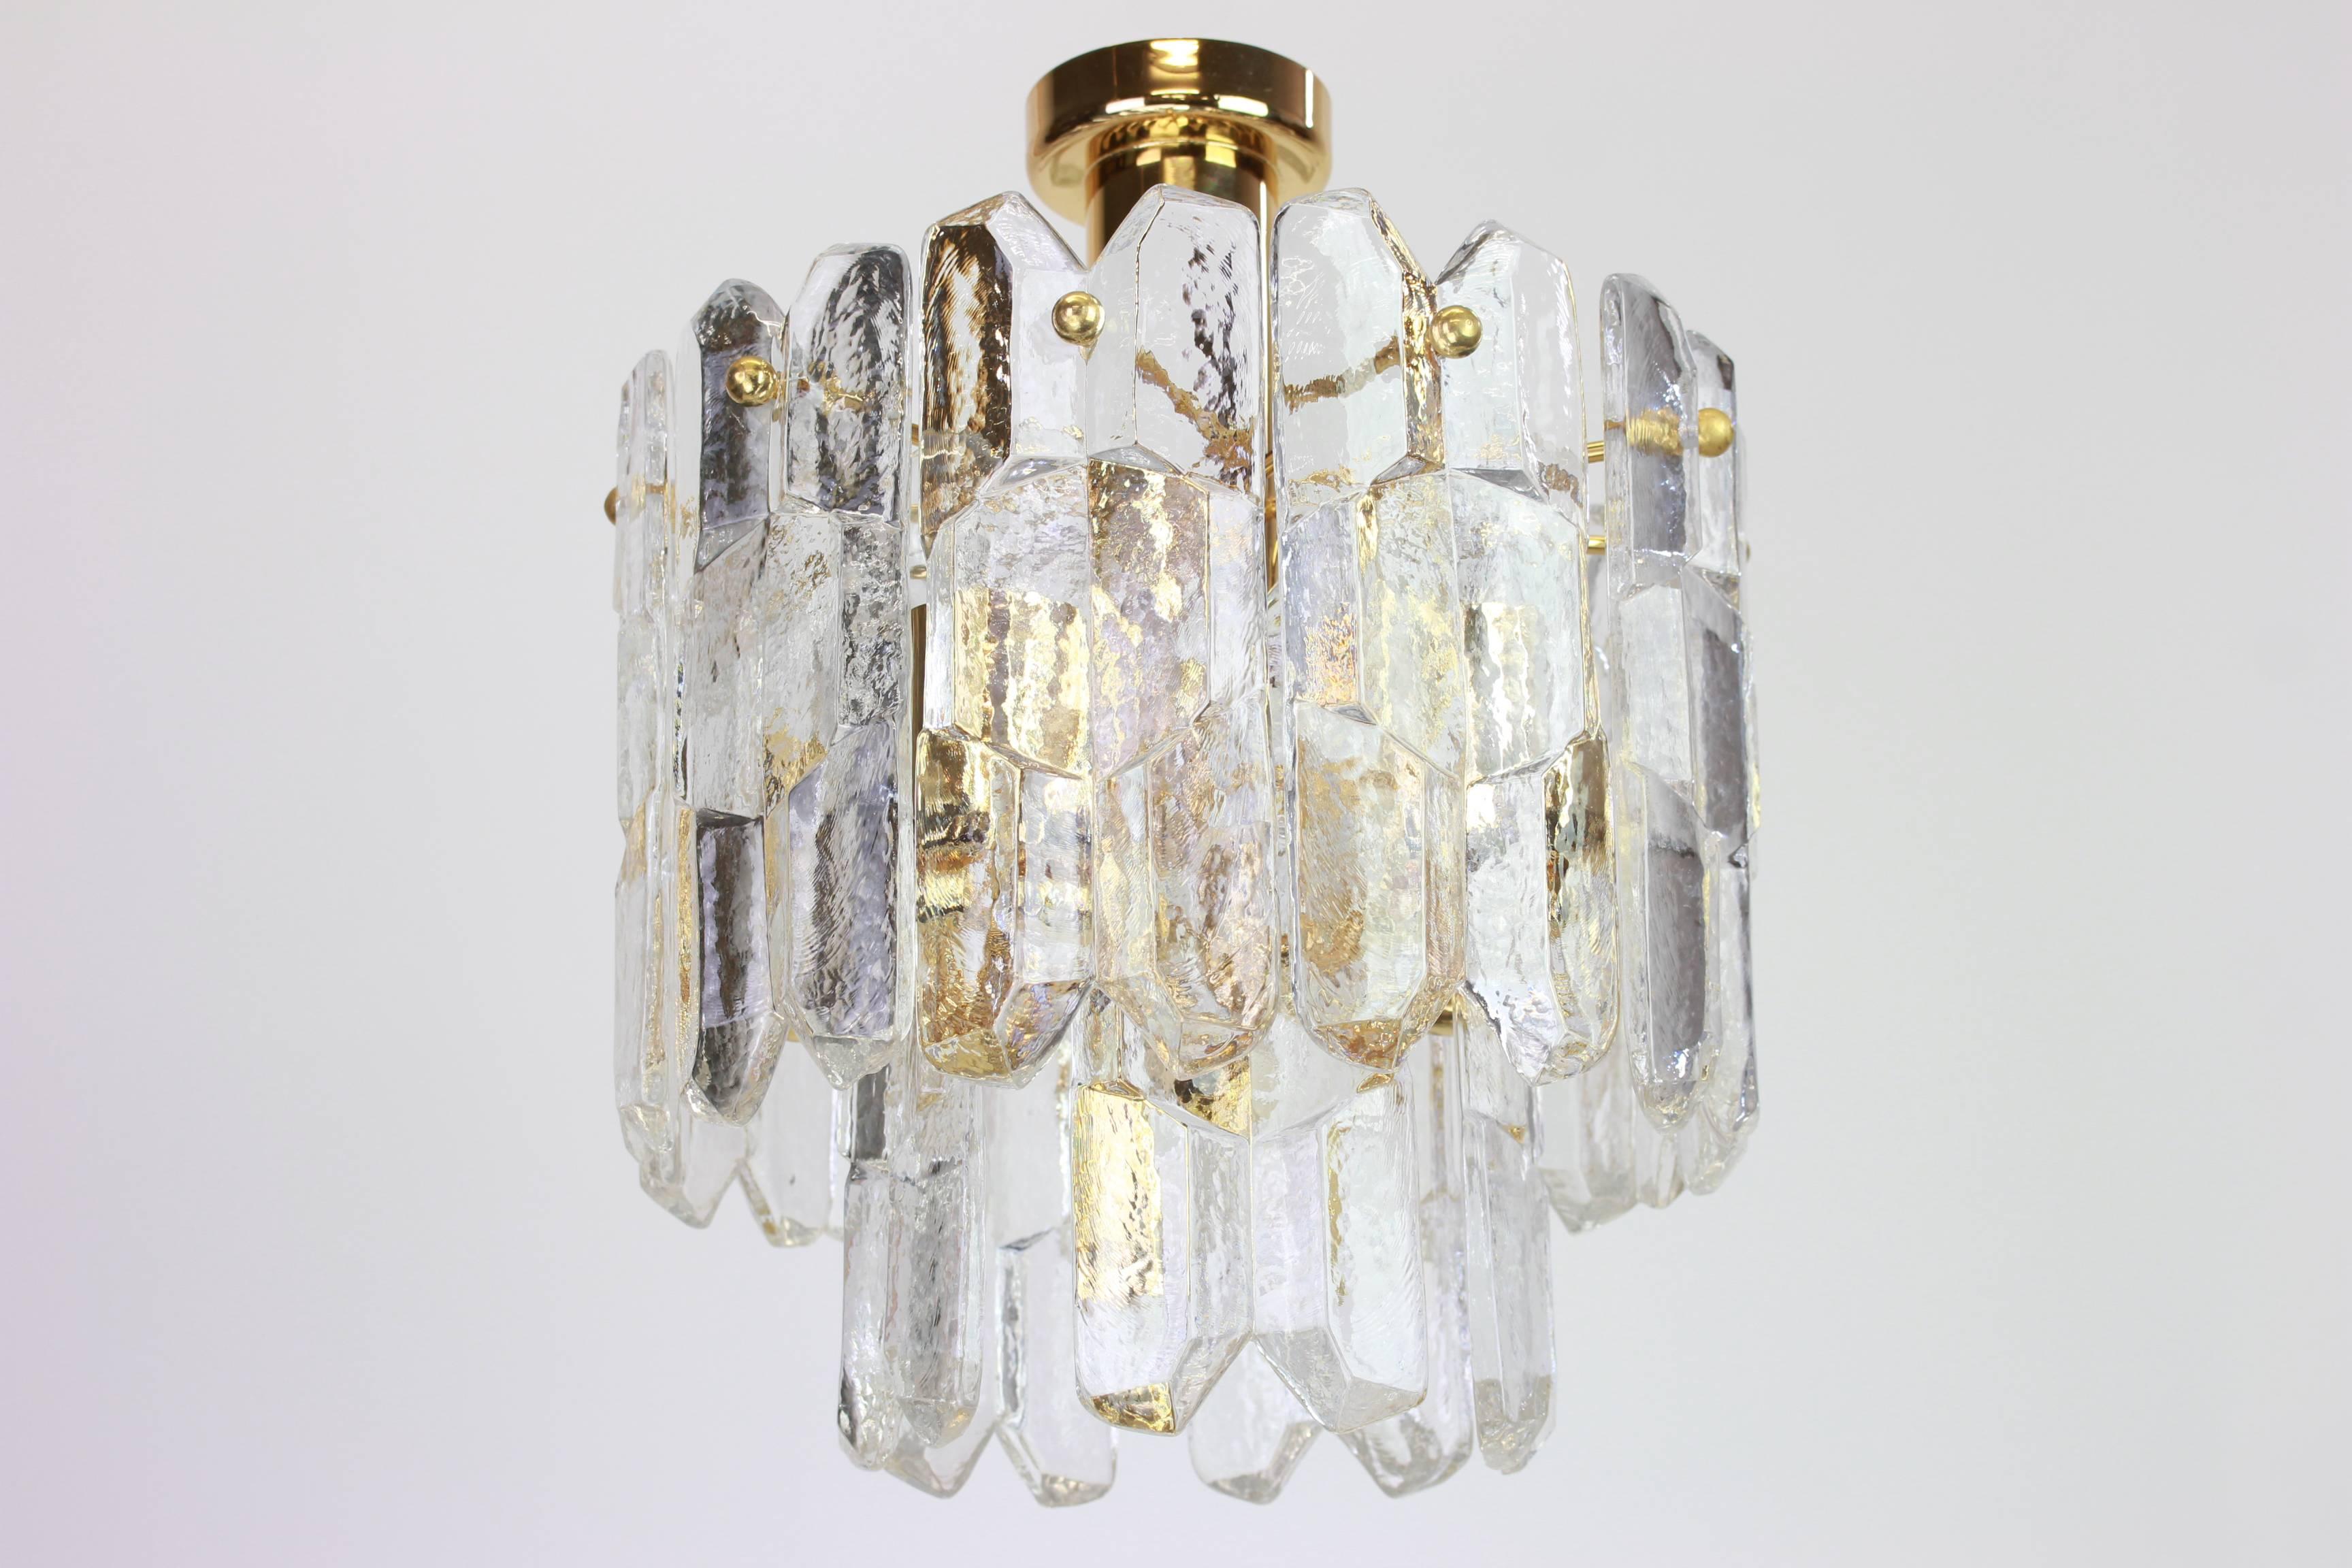 Wonderful gilt brass light fixture comprises 15 crystal Murano glass pieces on gilded brass frame. Its made by Kalmar (Serie: Palazzo), Austria, manufactured, circa 1970-1979.

Two tiers structure gathering many structured glasses, beautifully